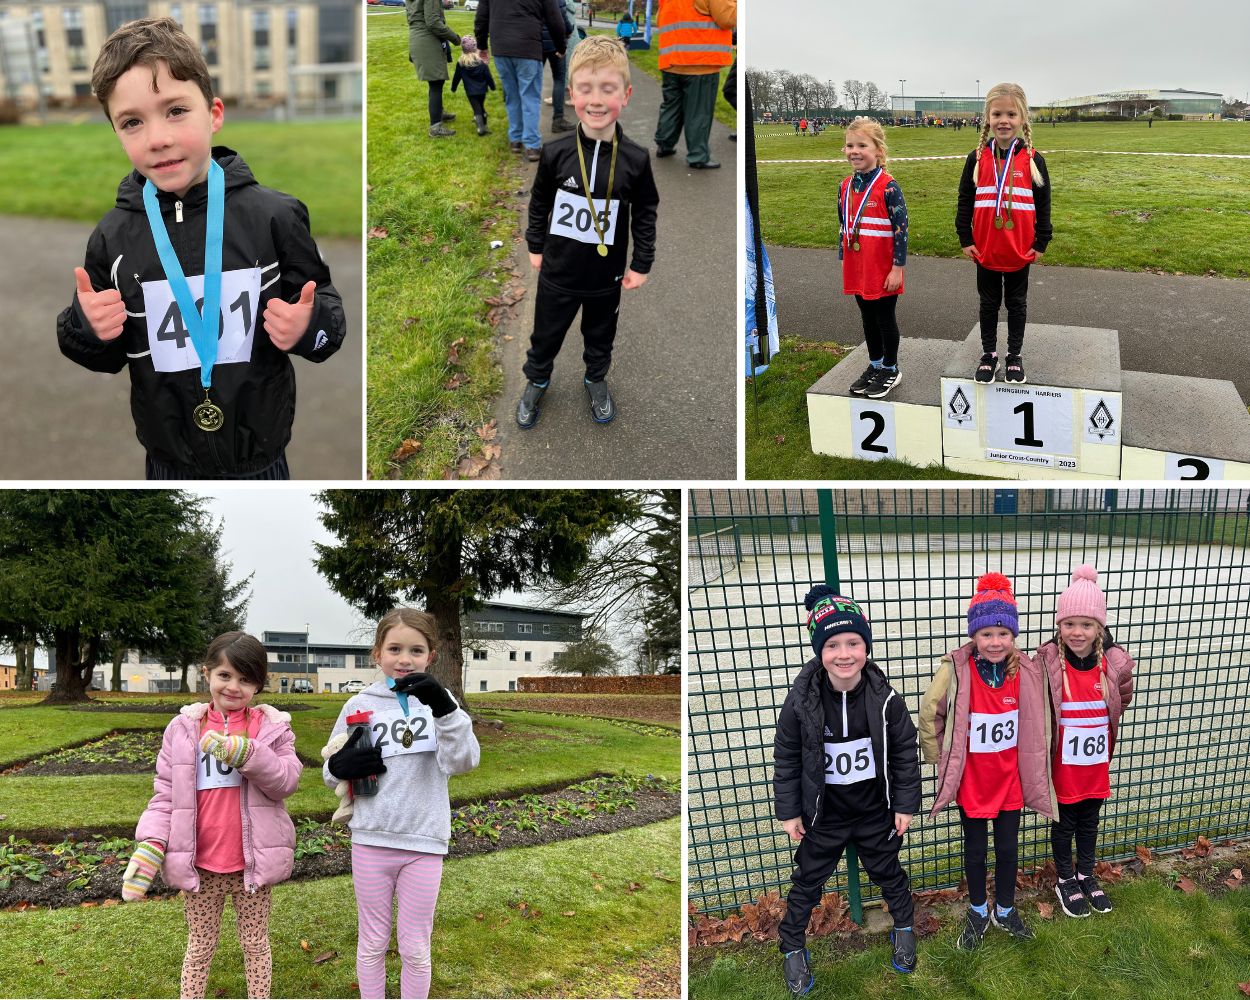 Our Mini Harriers at the Springburn Junior Cross Country